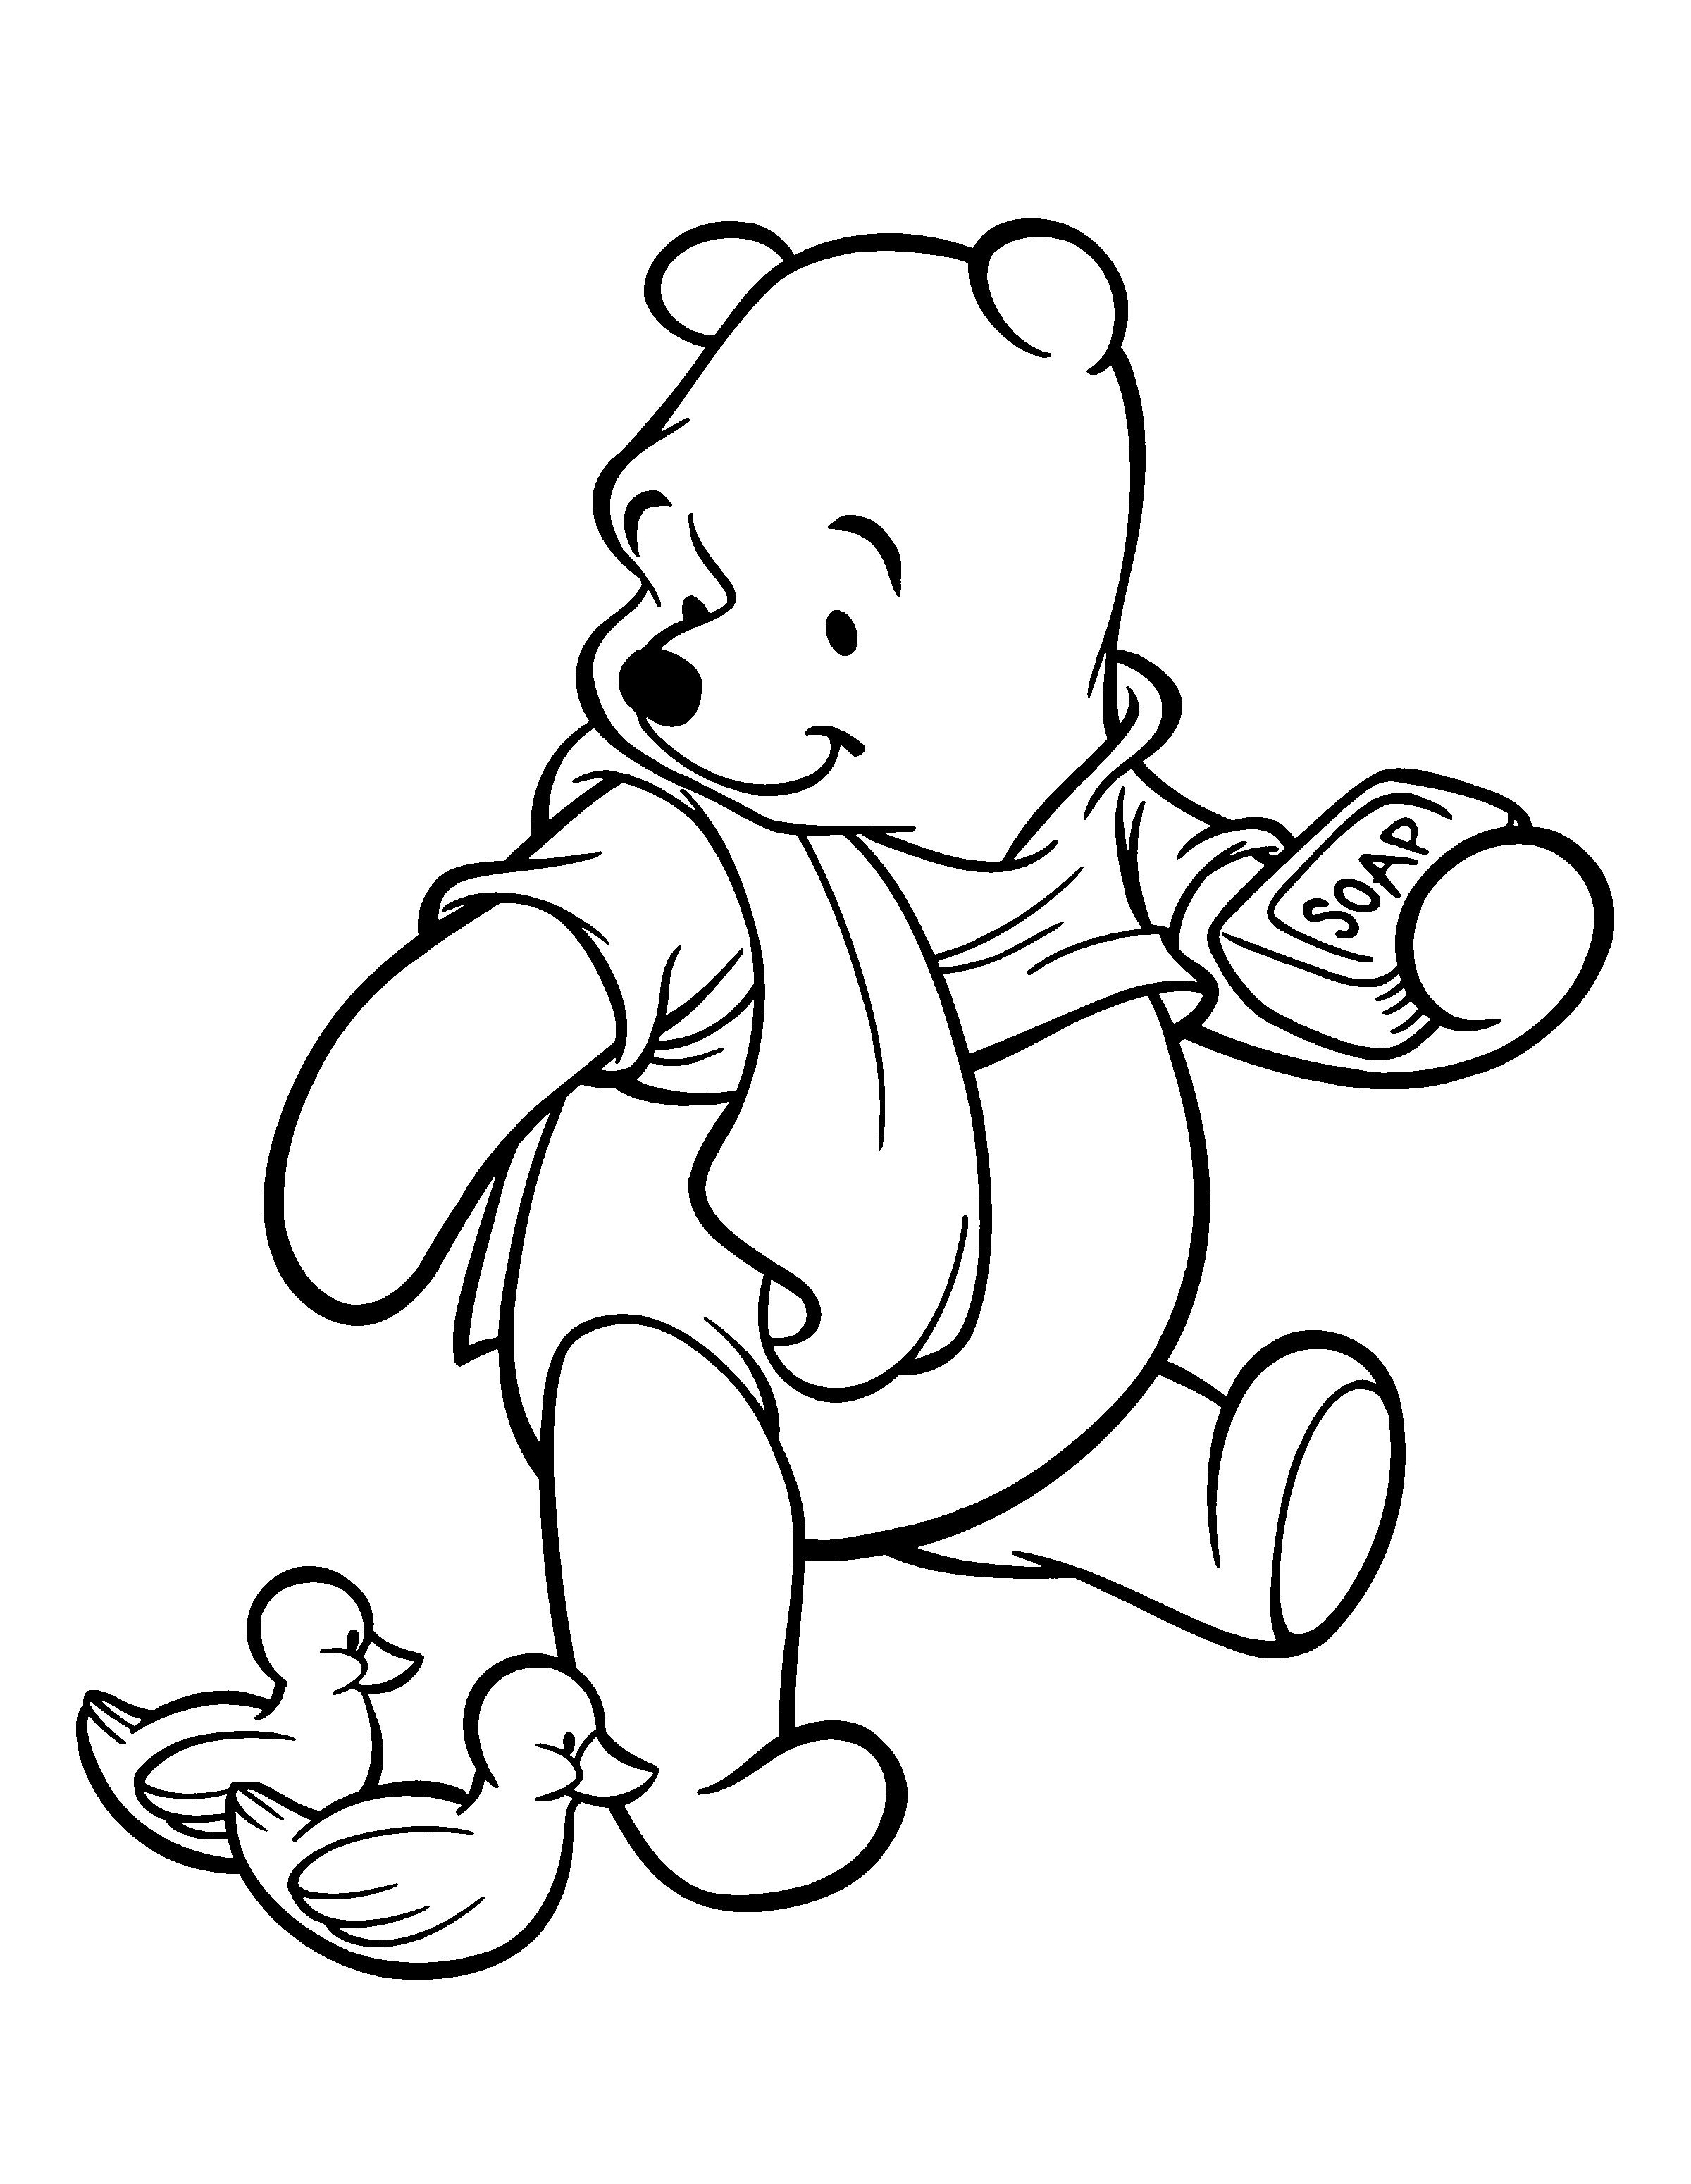 Download Winnie The Pooh Coloring Pages 3 Print